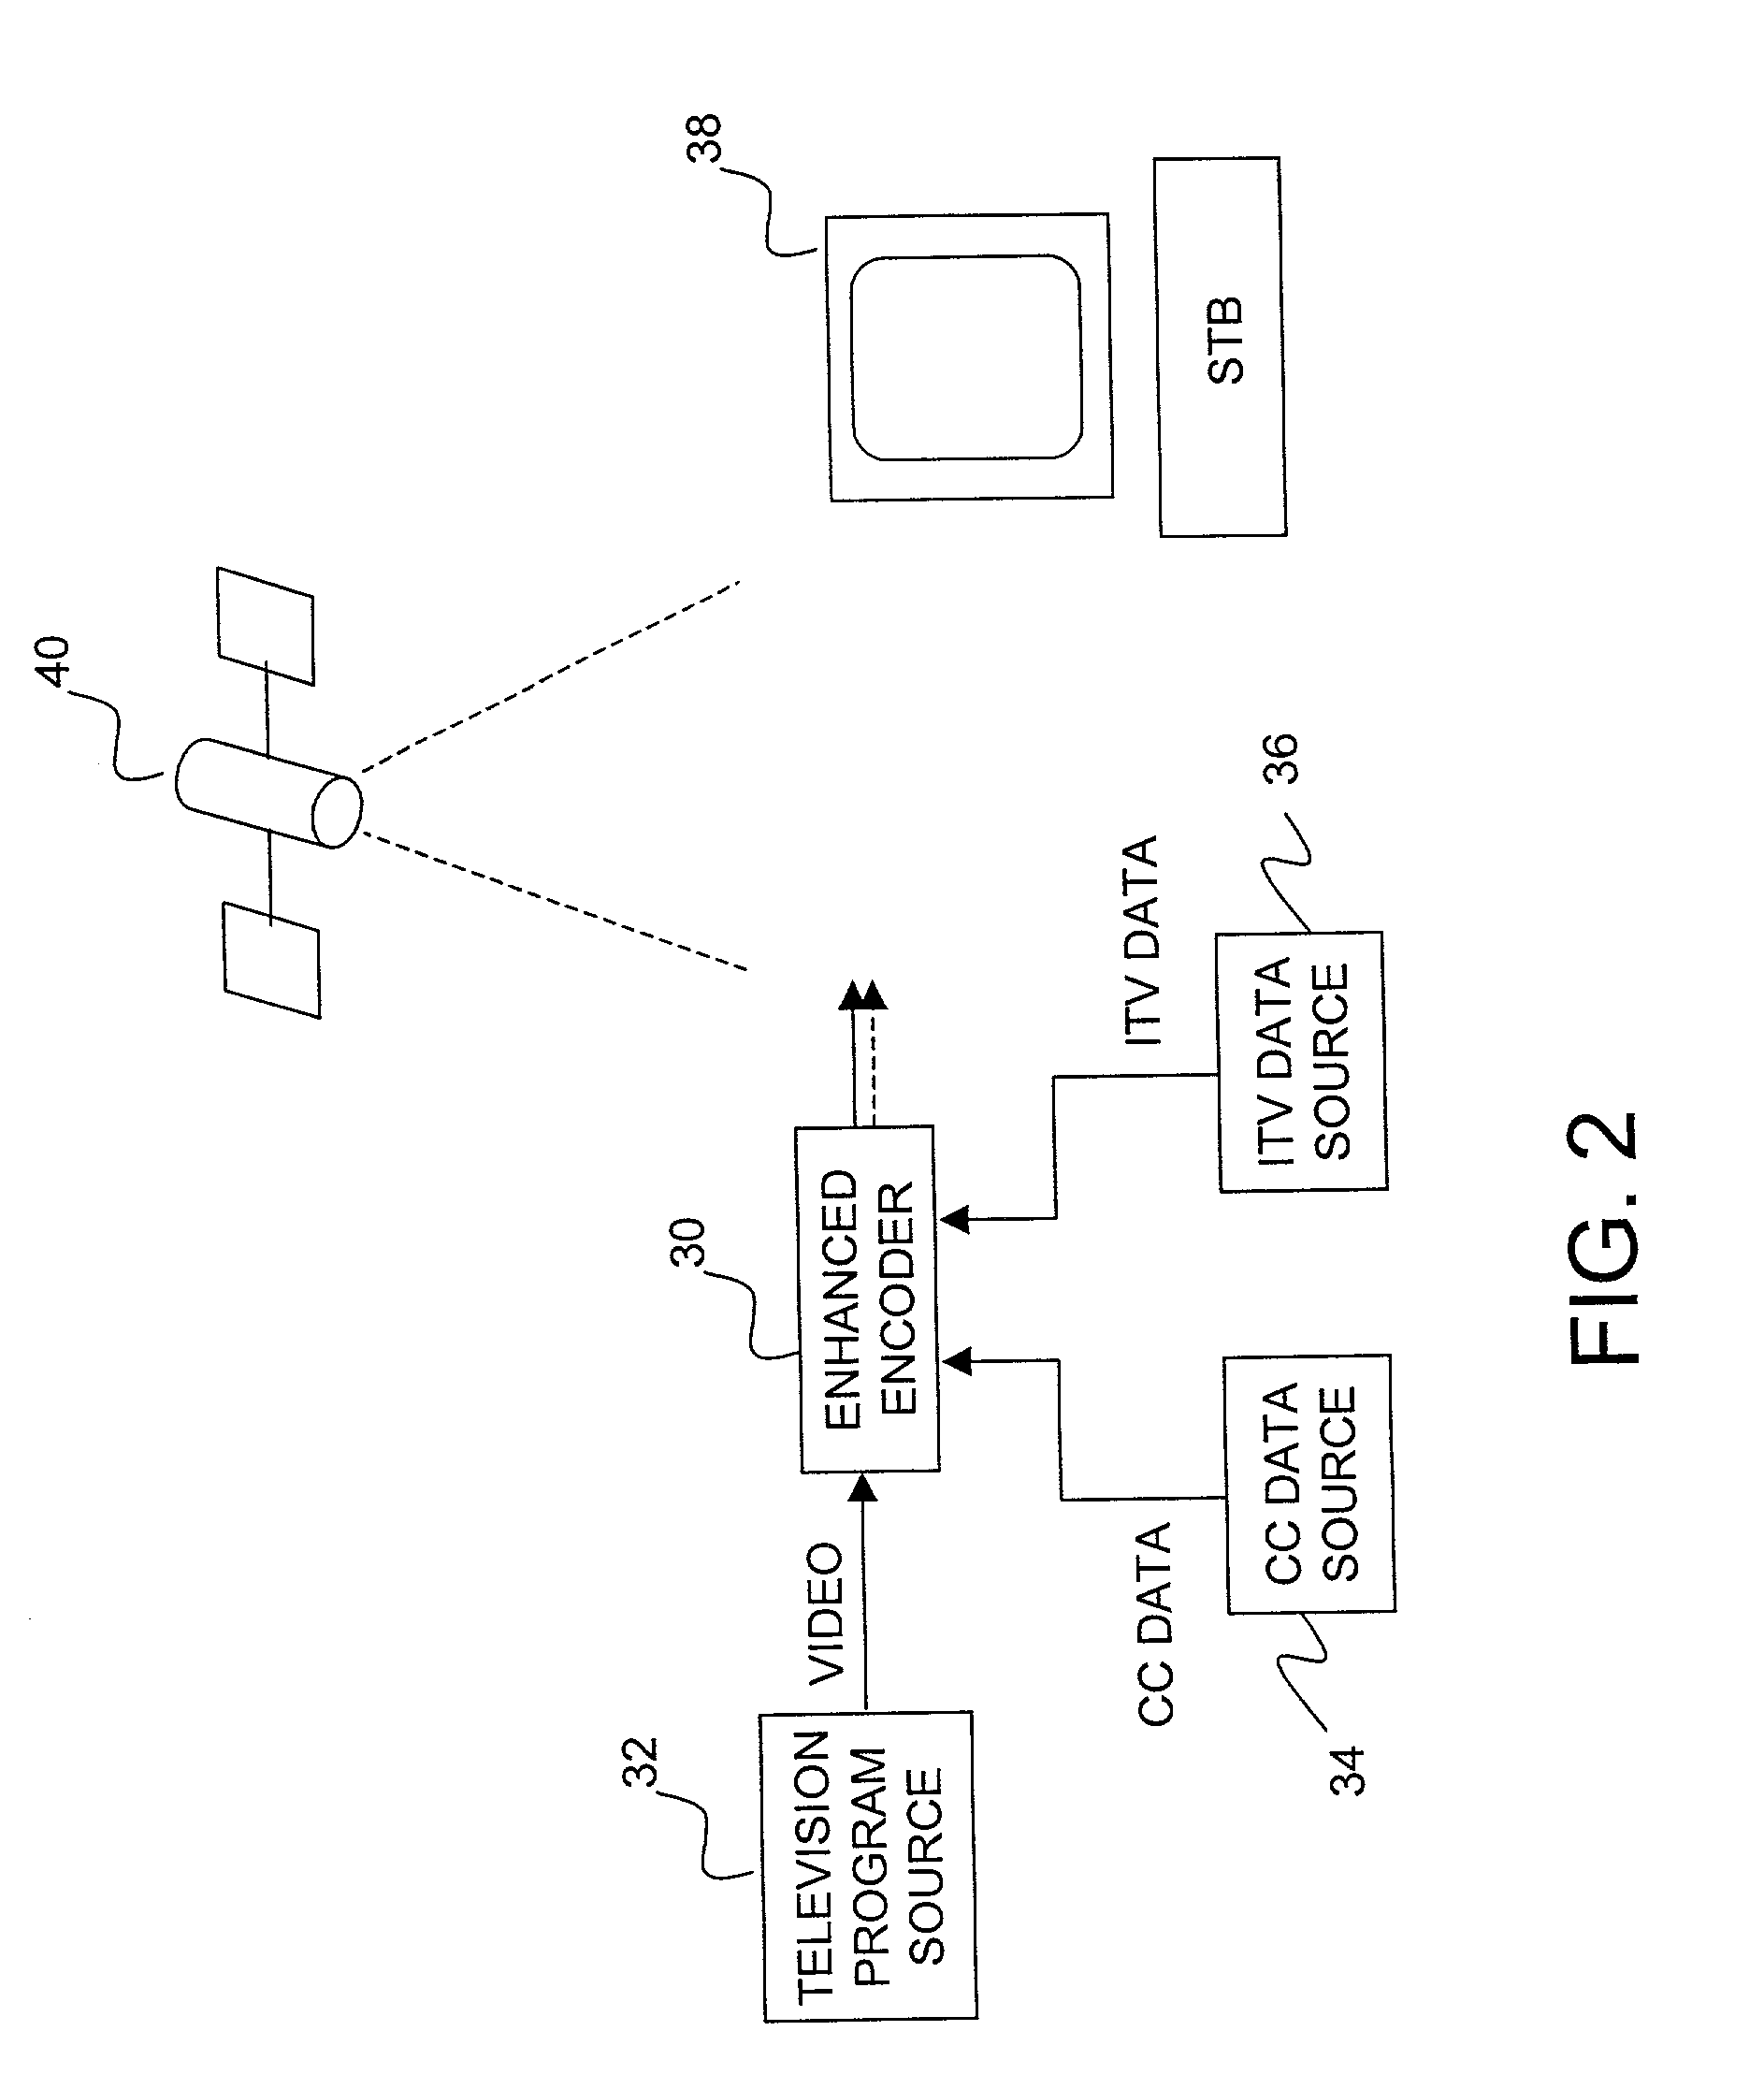 System and method for merging interactive television data with closed caption data